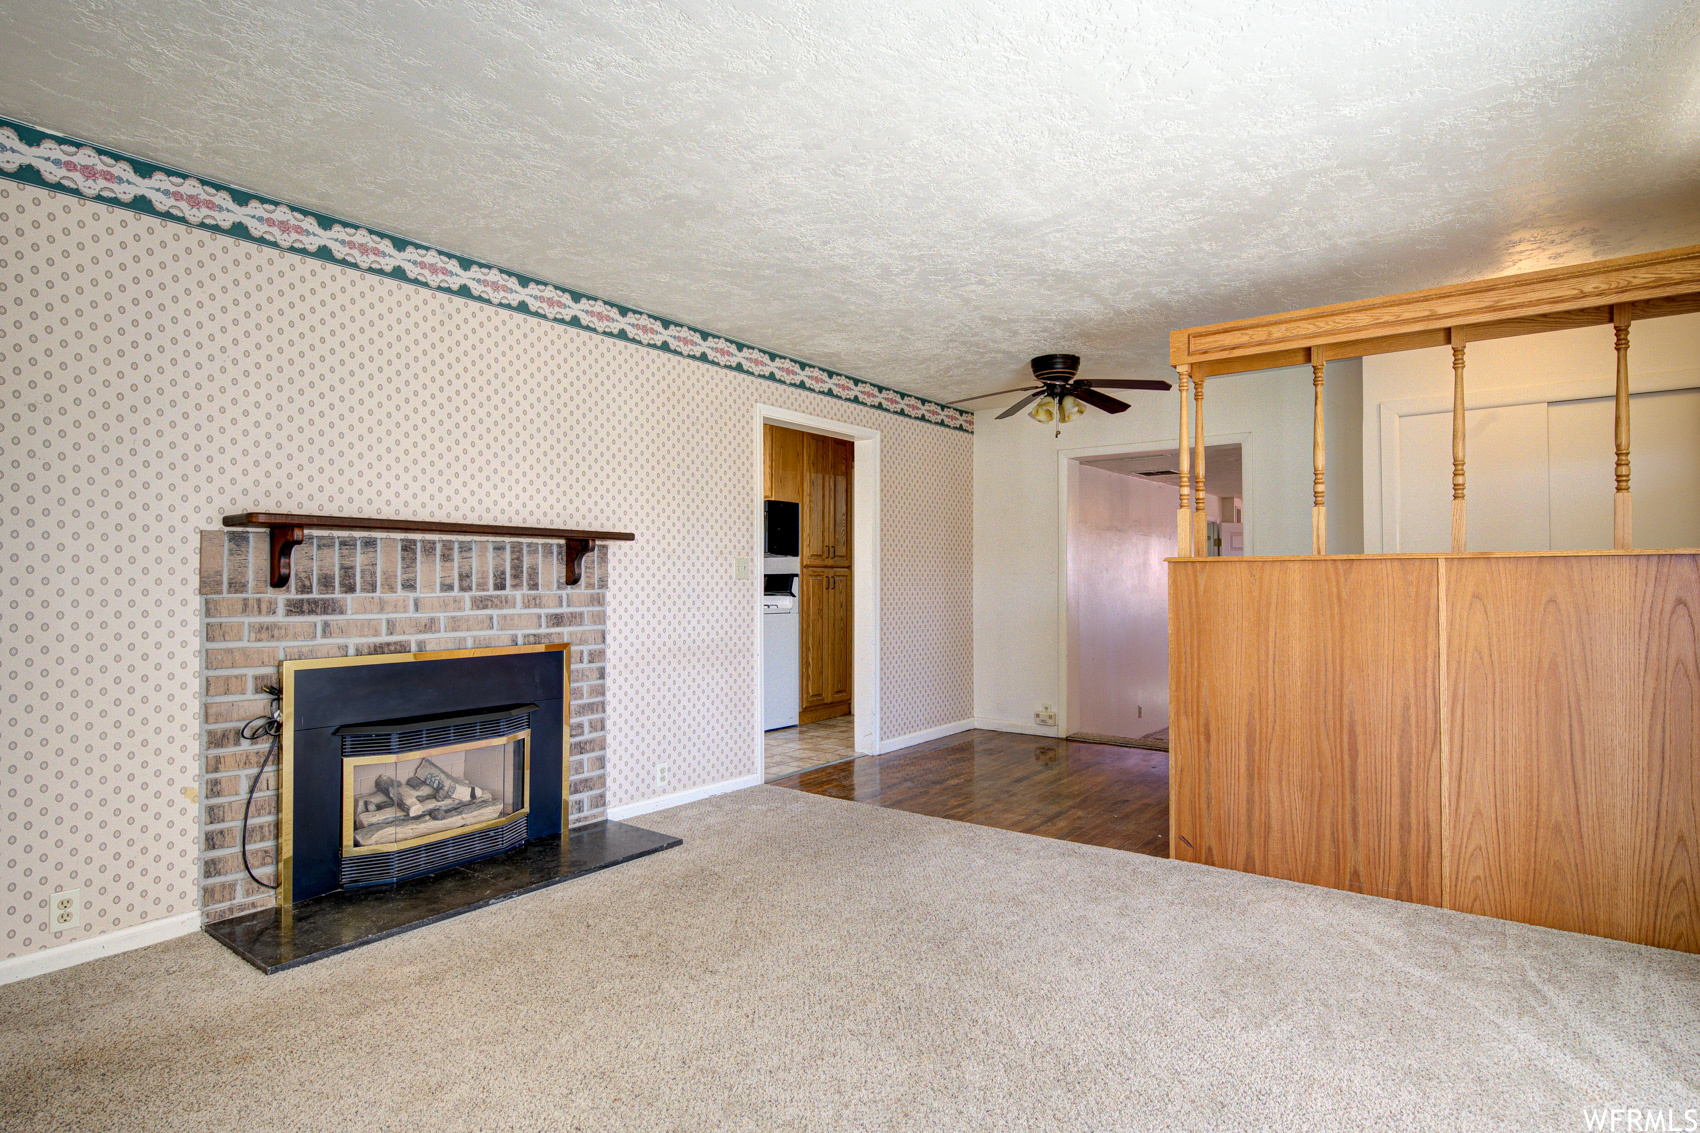 Unfurnished living room featuring a brick fireplace, ceiling fan, carpet floors, and a textured ceiling